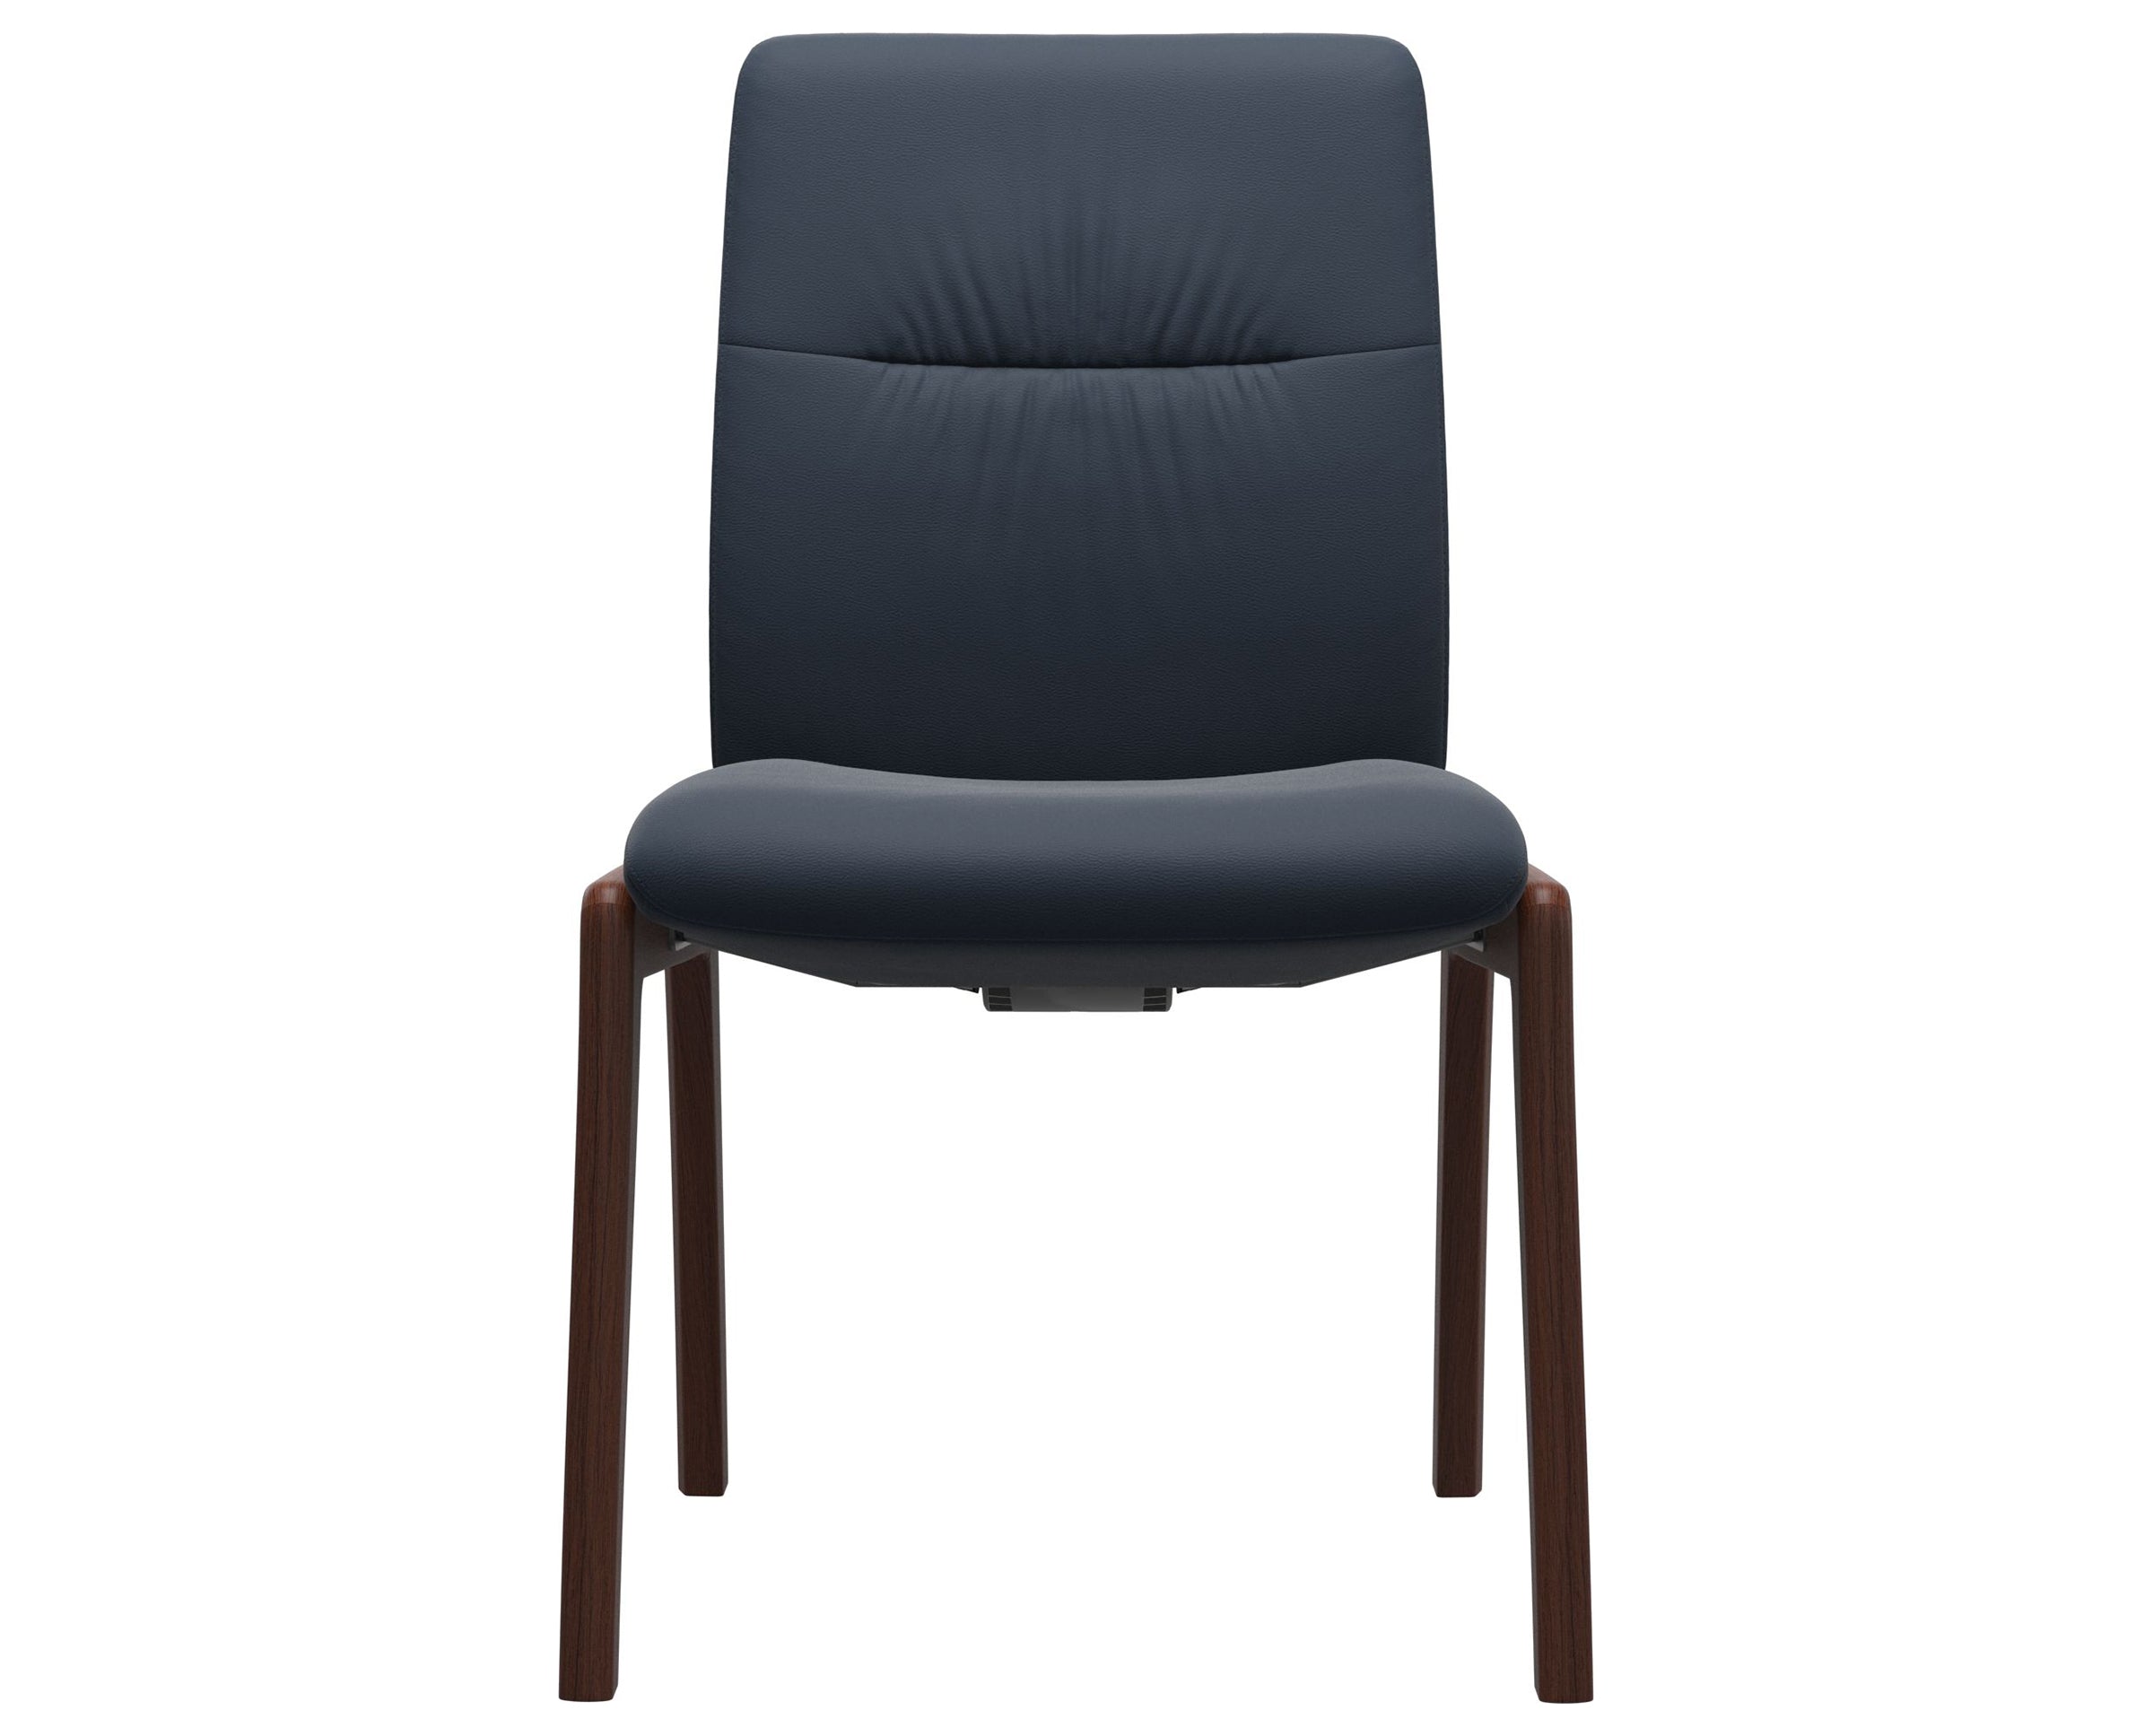 Paloma Leather Oxford Blue and Walnut Base | Stressless Mint Low Back D100 Dining Chair | Valley Ridge Furniture